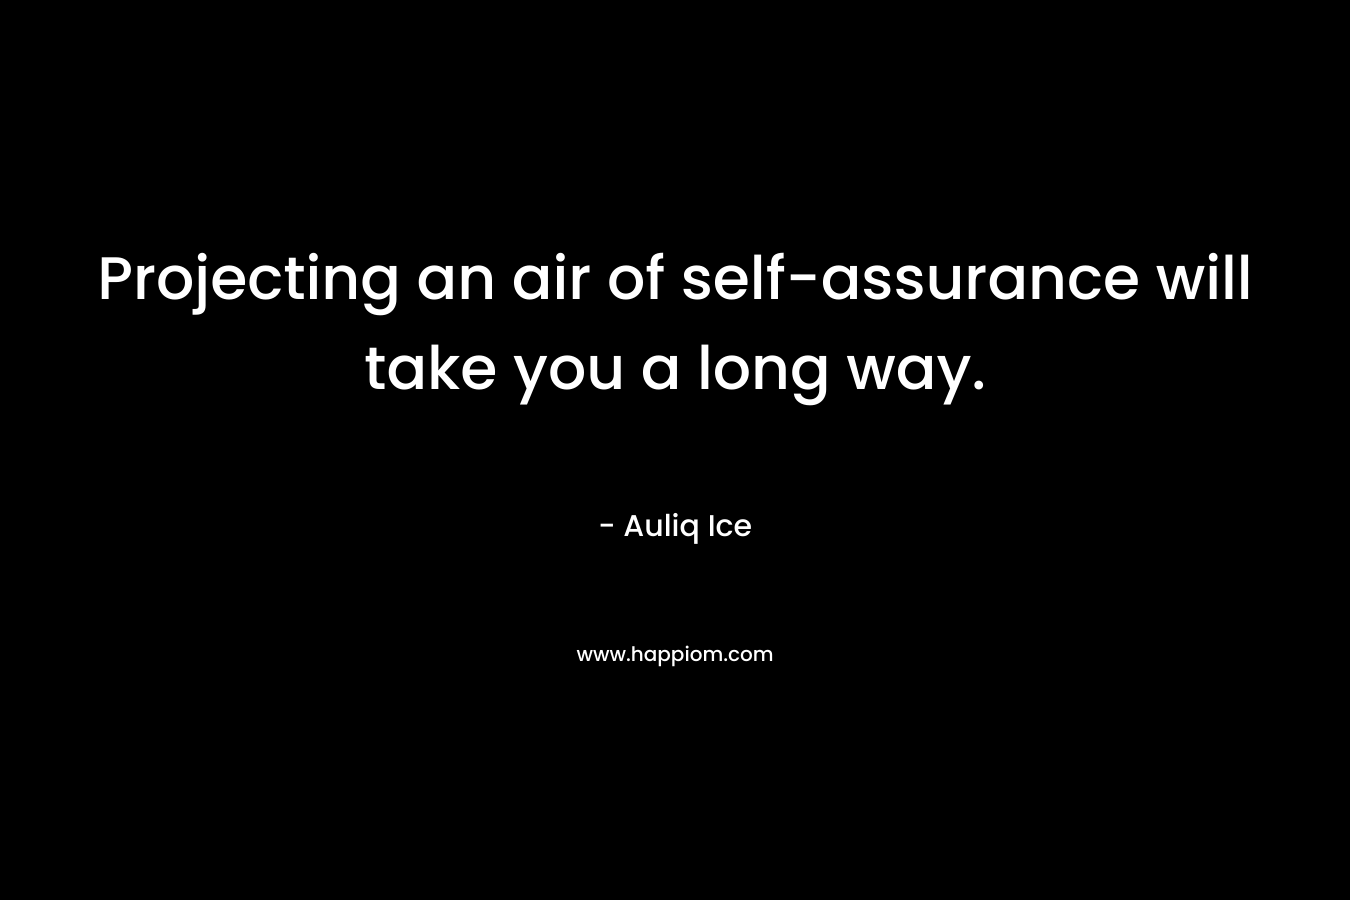 Projecting an air of self-assurance will take you a long way.